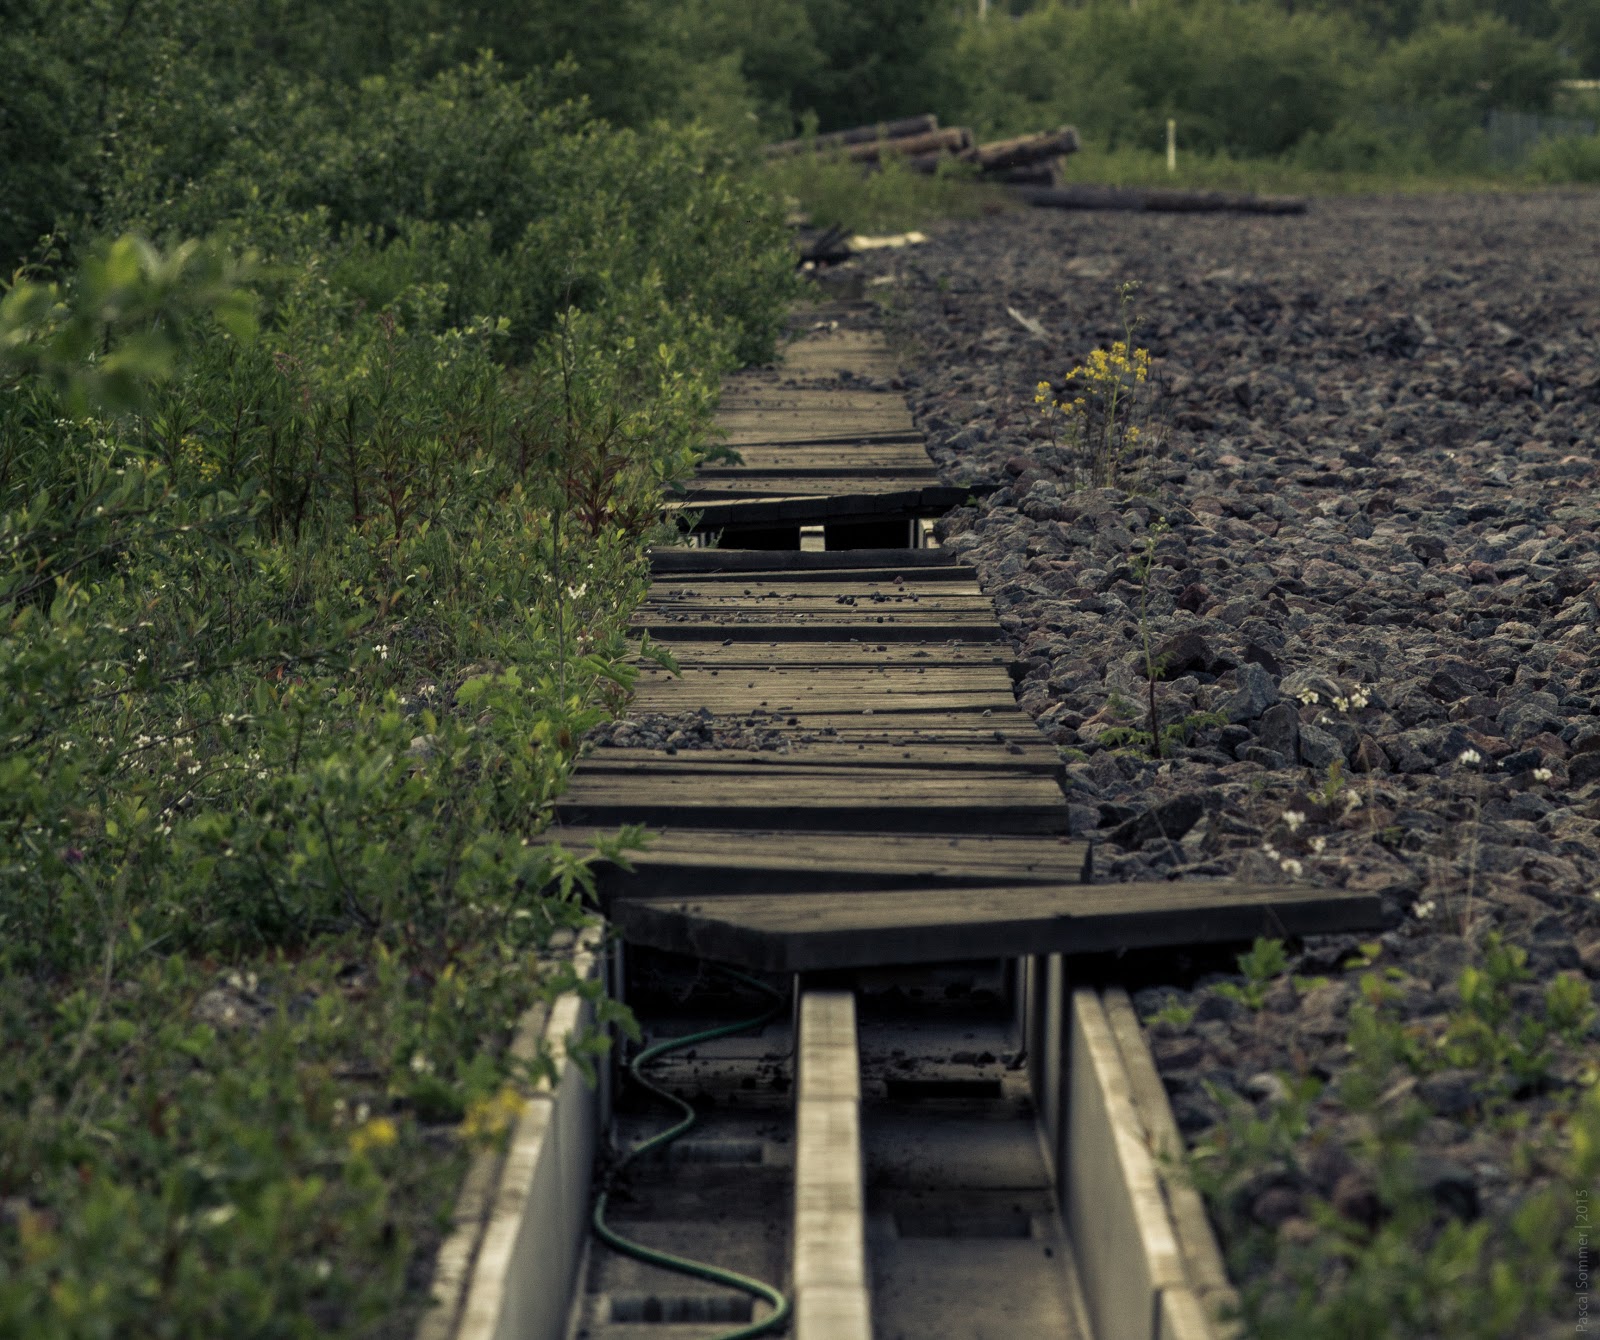 Near the old Kiruna Railway Station, which has been torn down now